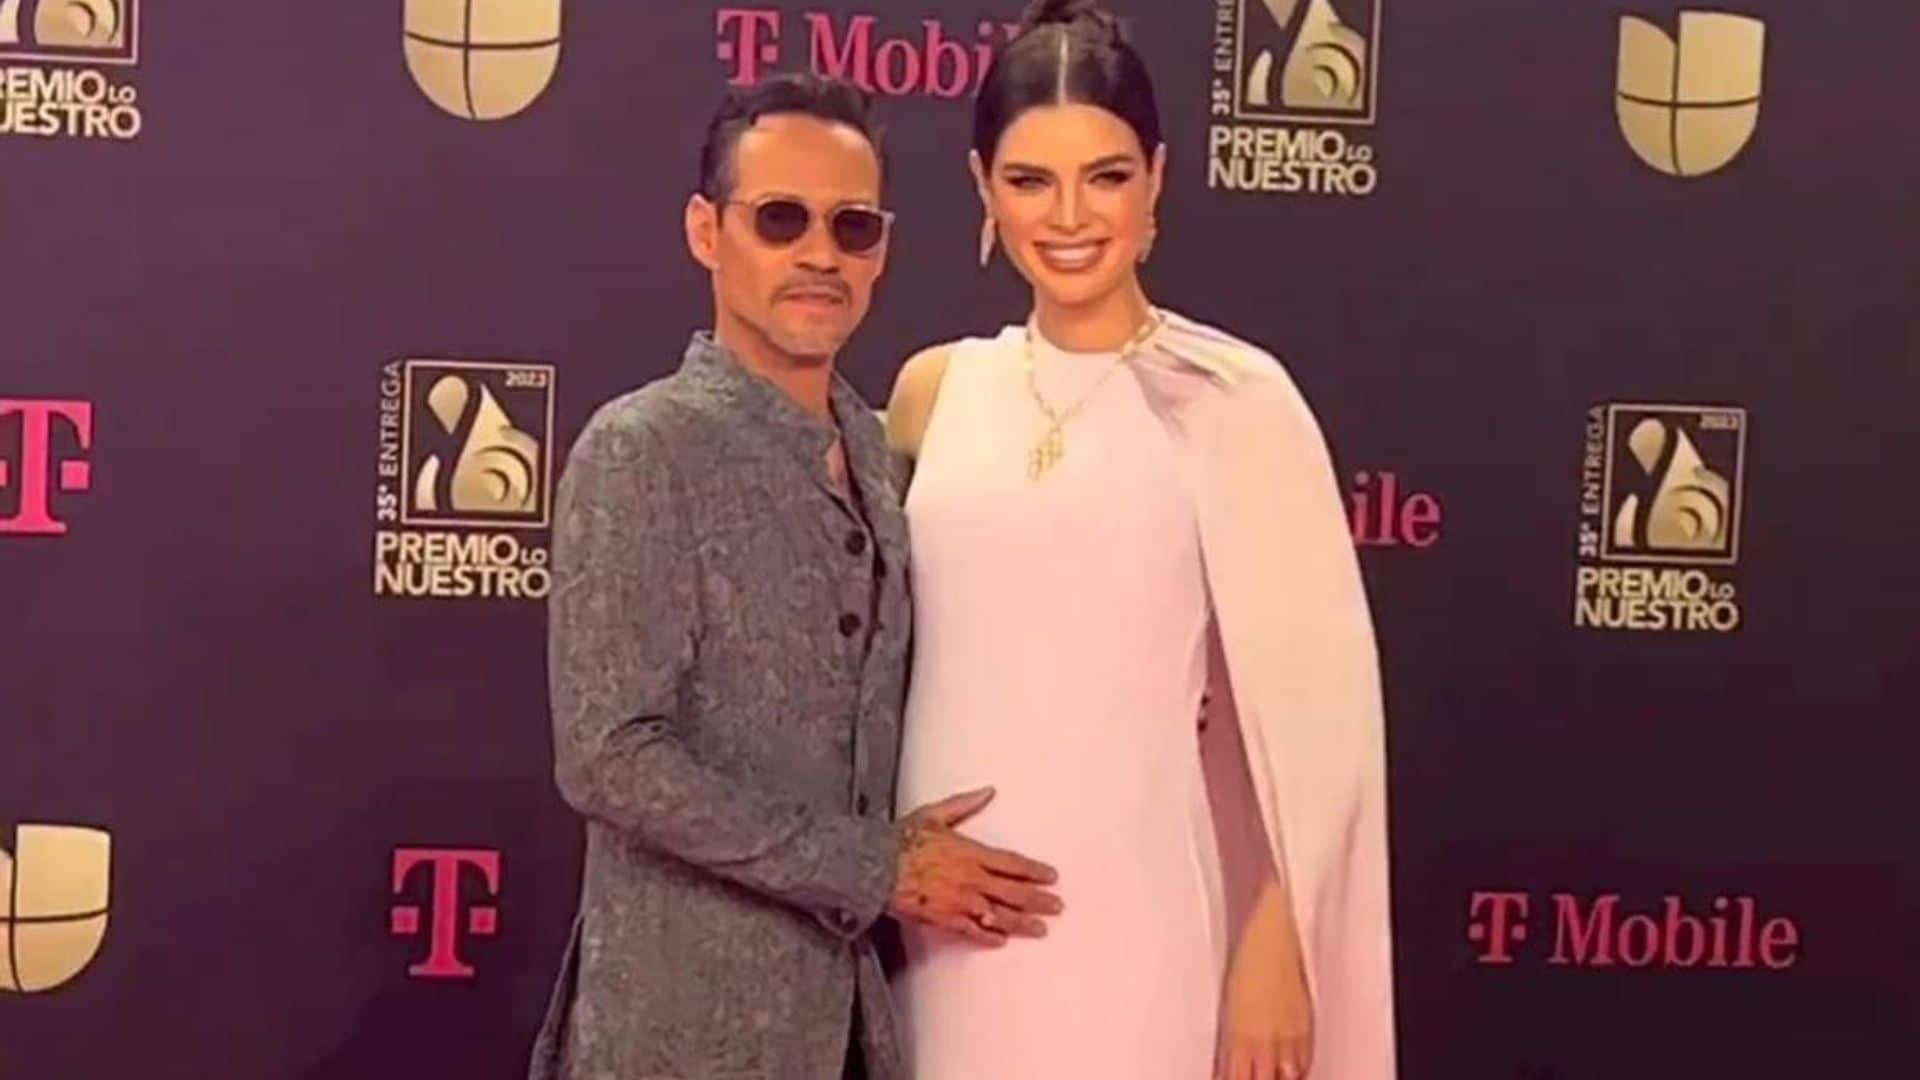 Nadia Ferreira and Marc Anthony’s first red carpet appearance after pregnancy announcement